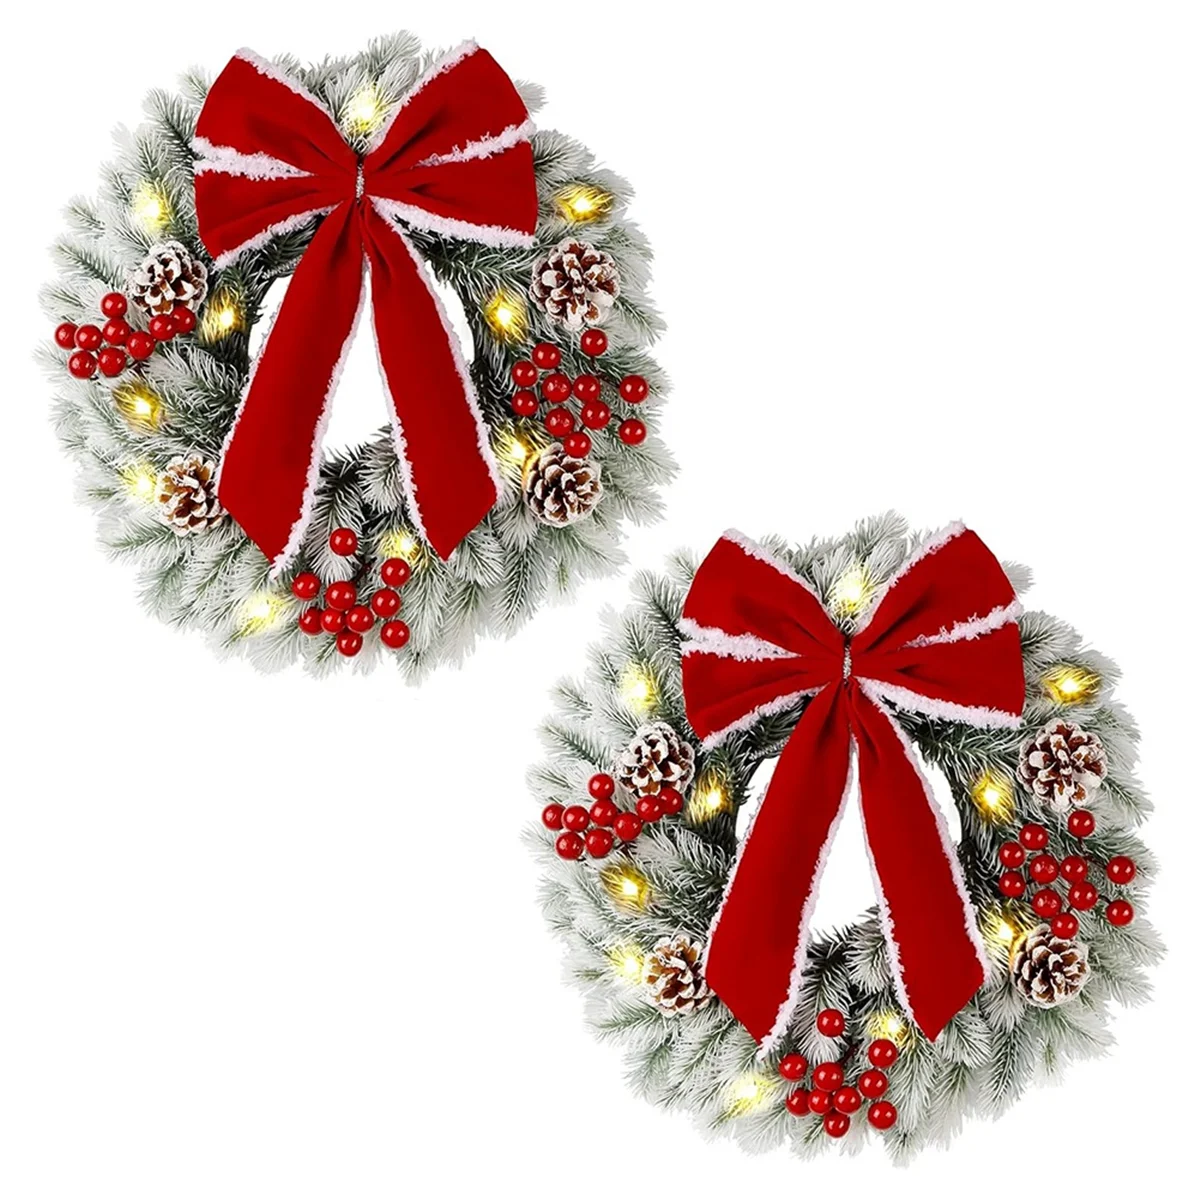 

2 Pcs Lighted Christmas Wreaths, 13 Inch Pre-Lit Mini Xmas Wreath with Red Bow, Pine Needle Wreath with LED Lights